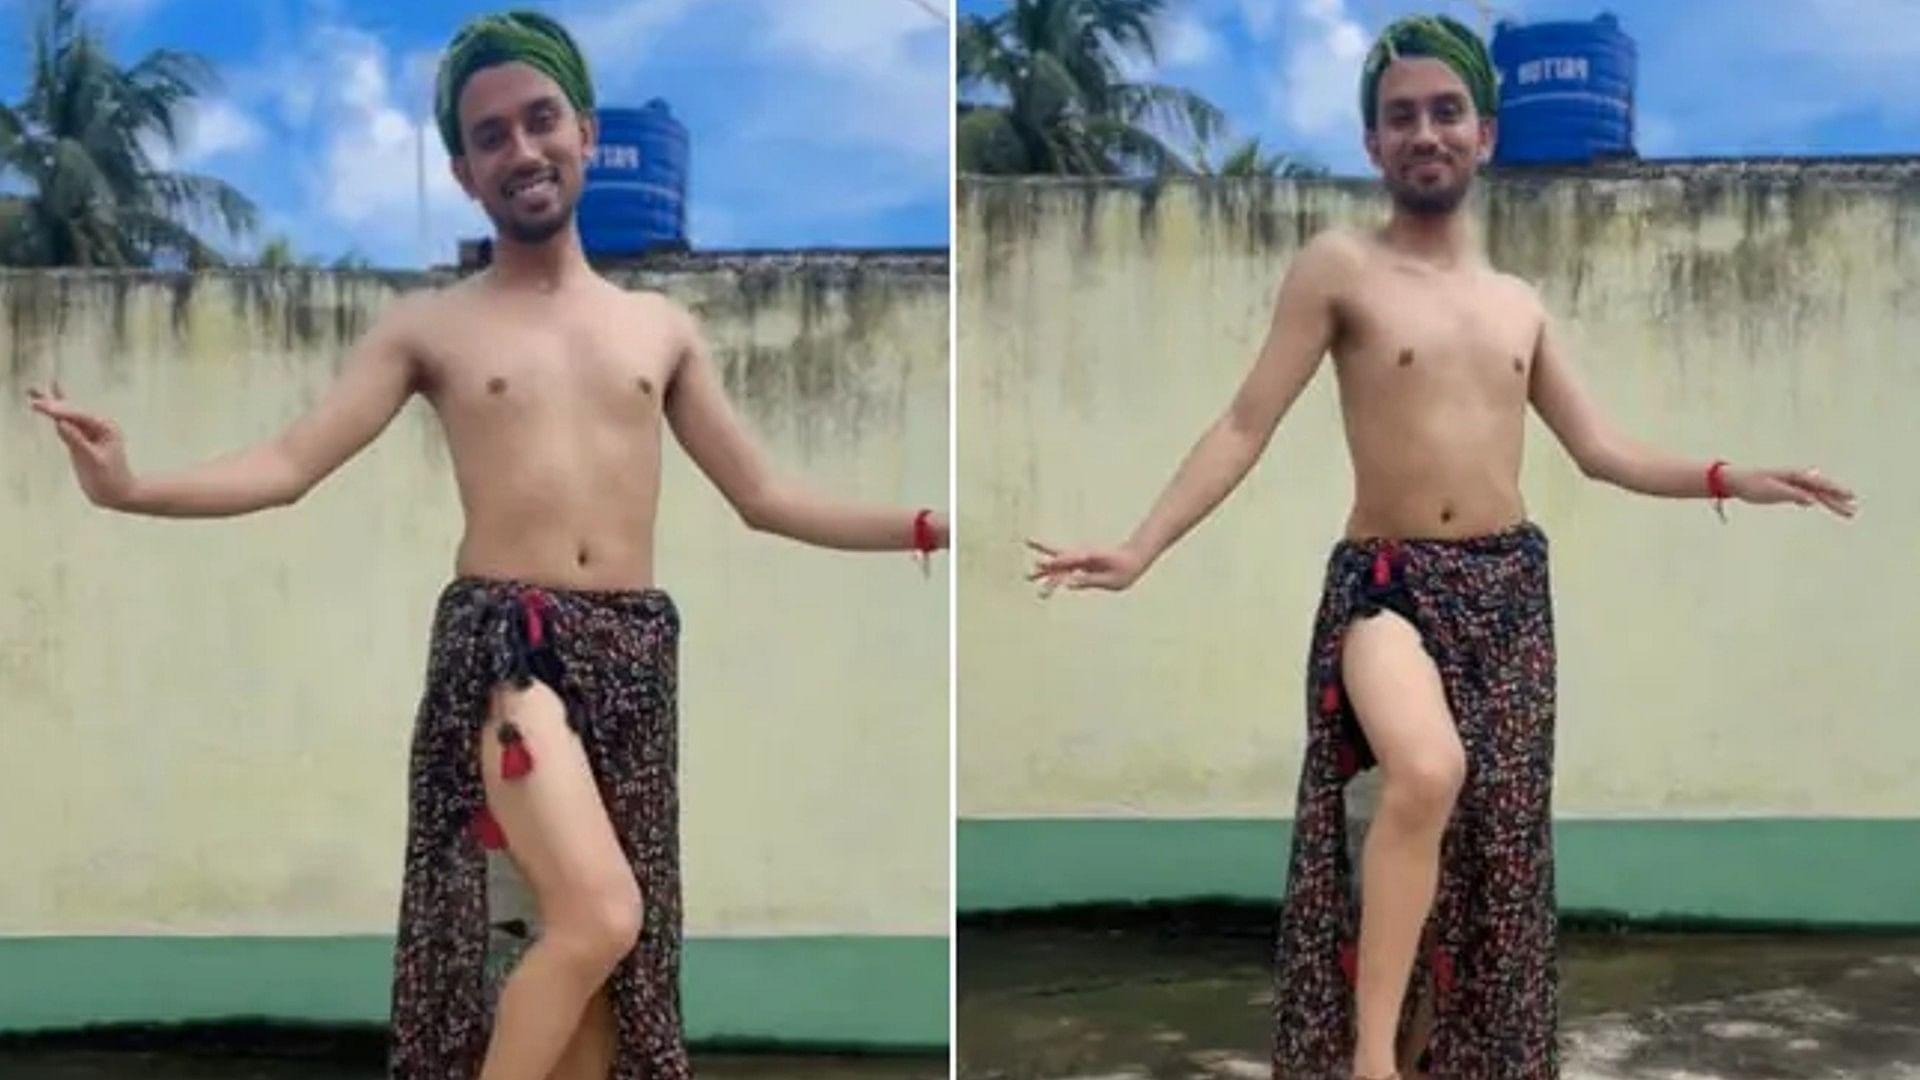 man amazing belly dance performance has really impressed the internet